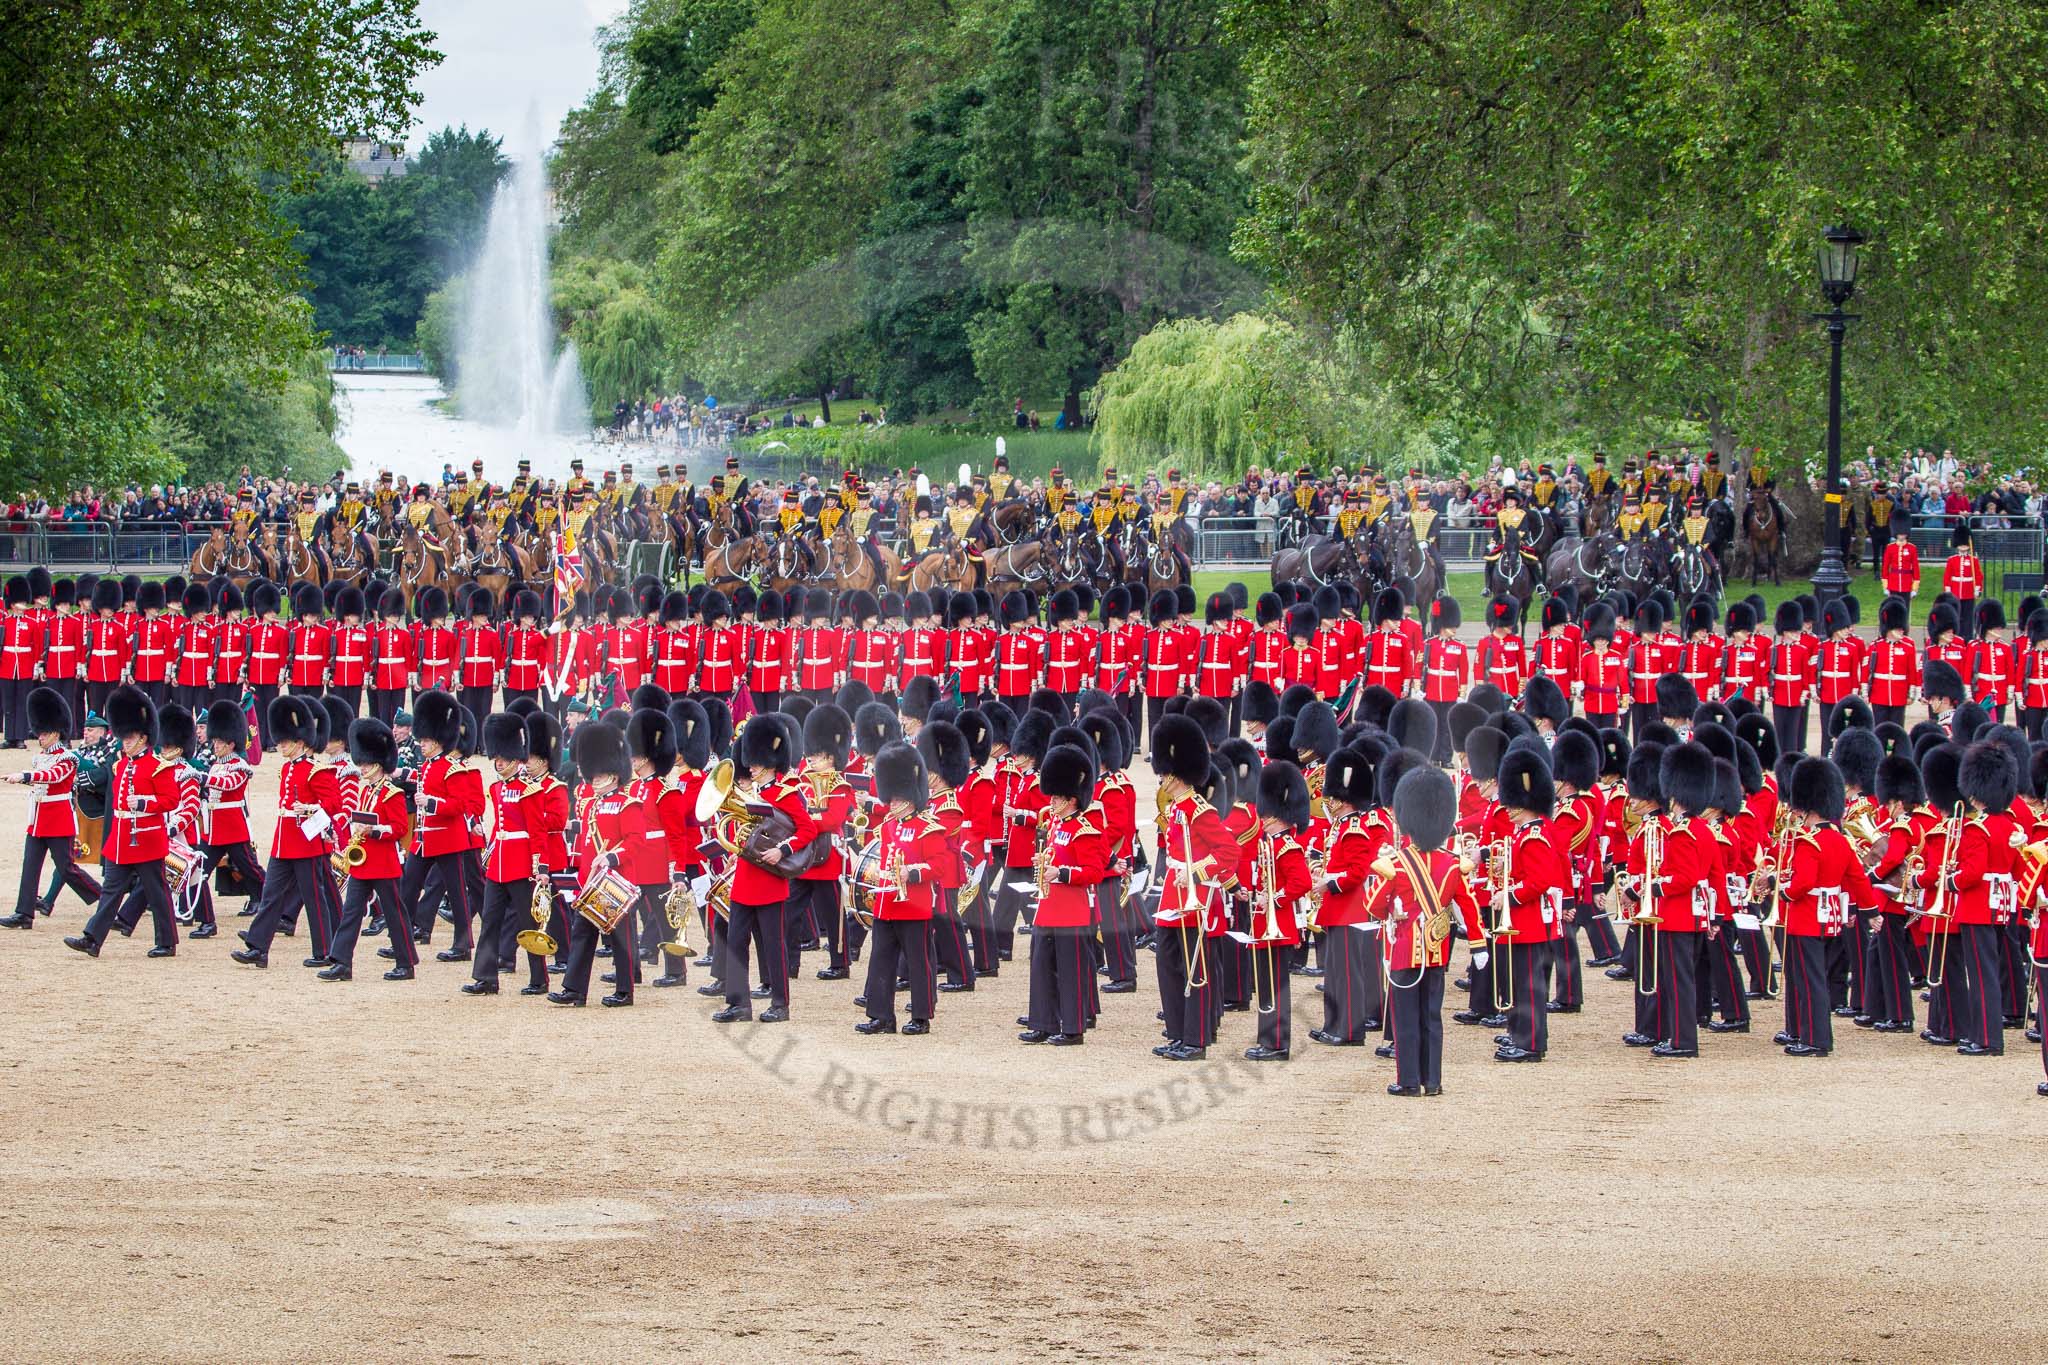 The Colonel's Review 2012: The Massed Bands are moving from the centre of Horse Guards Parade towards their initial position on the western side..
Horse Guards Parade, Westminster,
London SW1,

United Kingdom,
on 09 June 2012 at 11:49, image #370